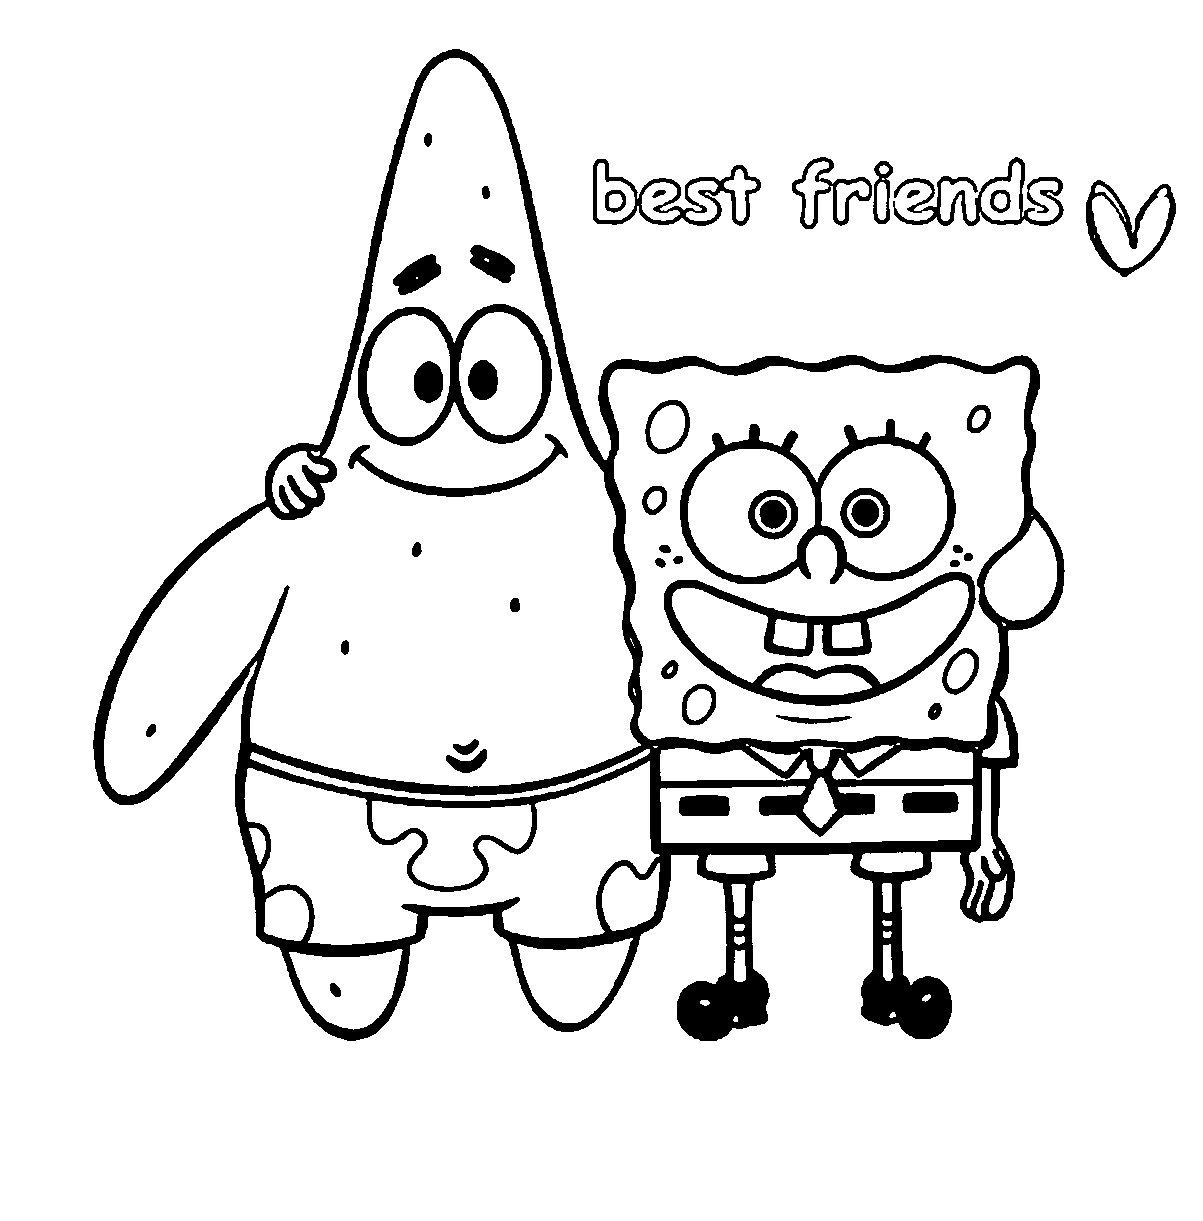 Words Best Friends Coloring Page | Wecoloringpage